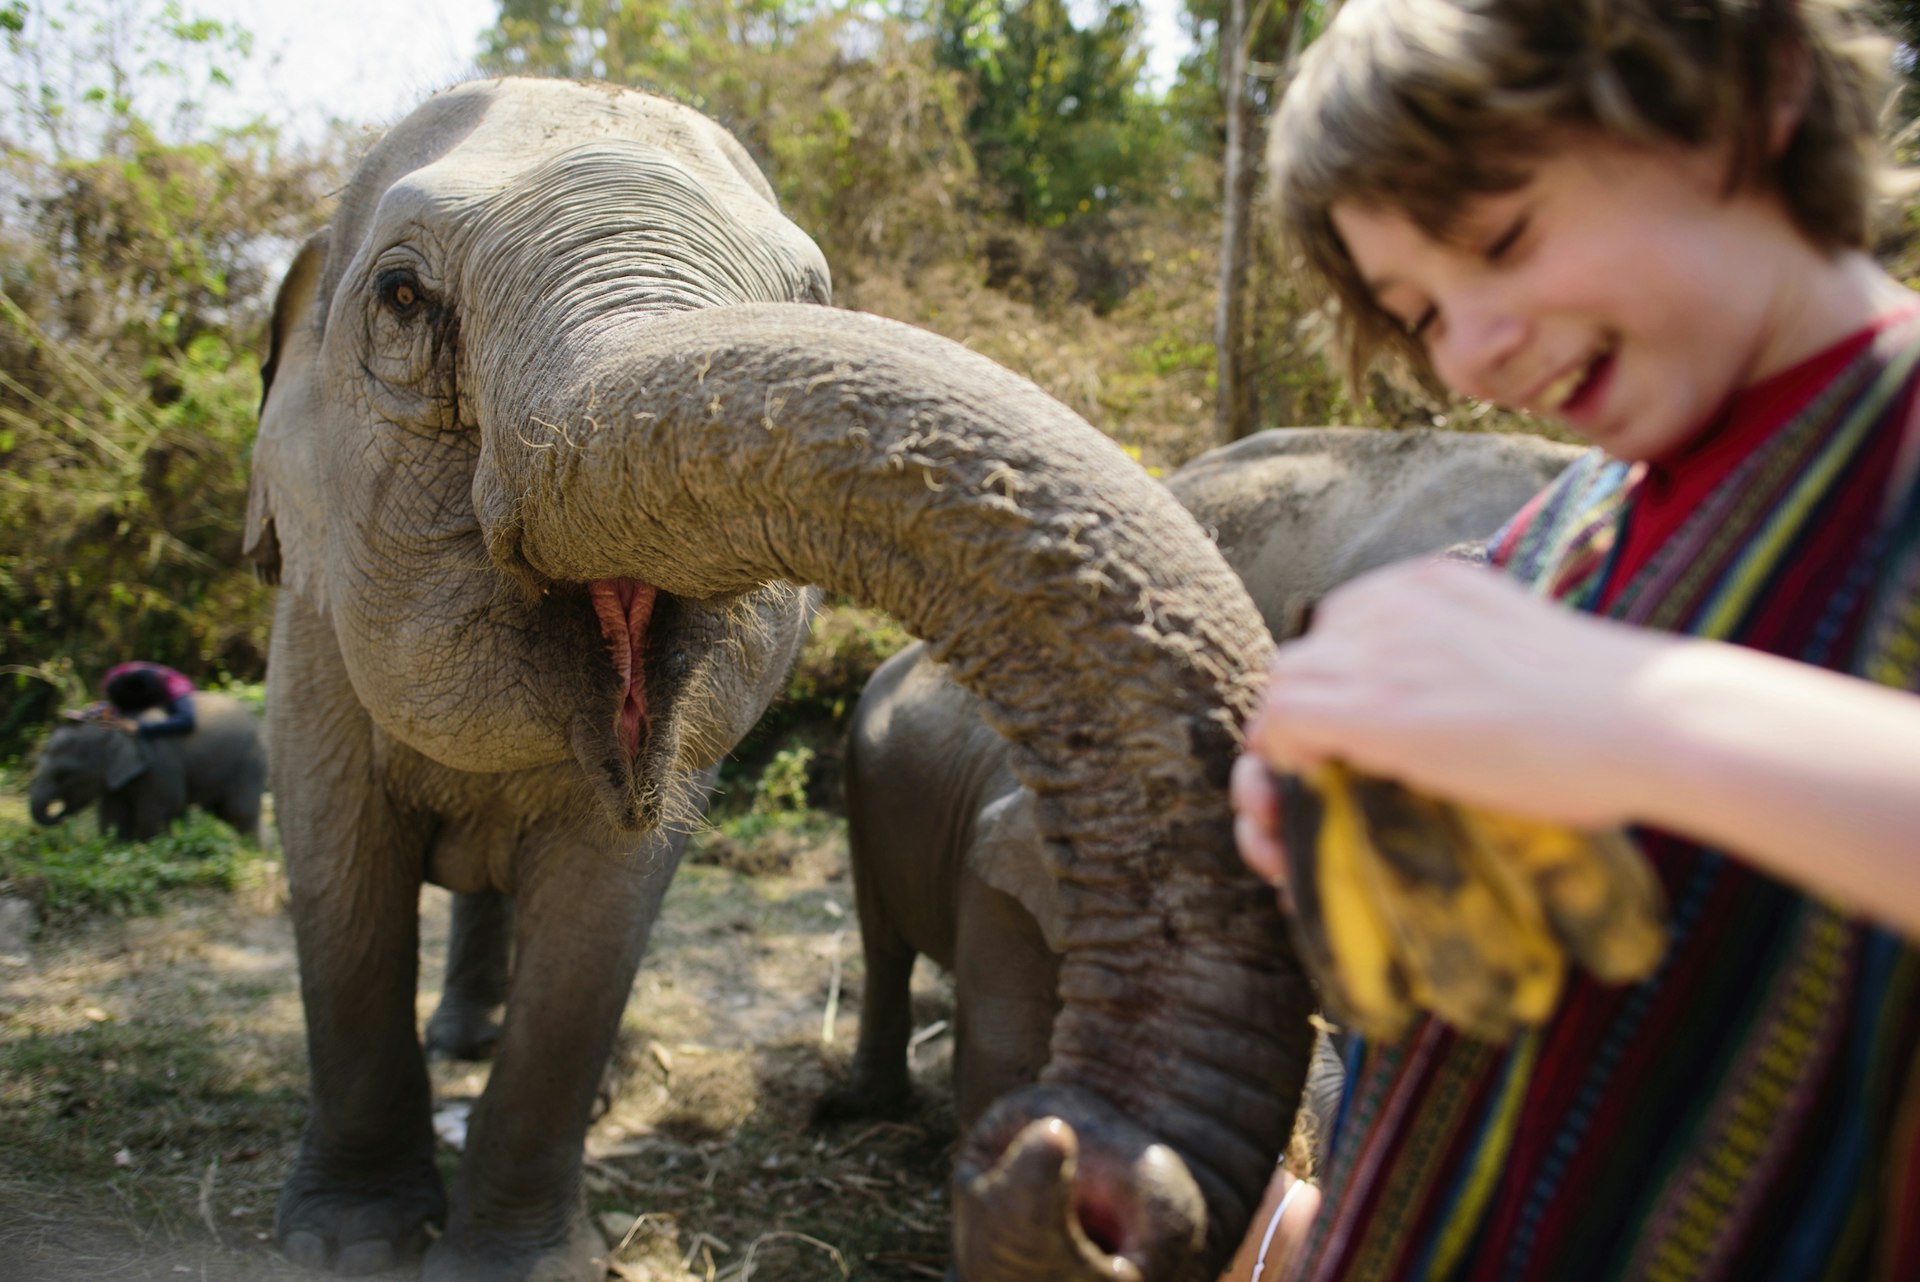 A child laughs as an elephant reaches its trunk towards him to take a banana